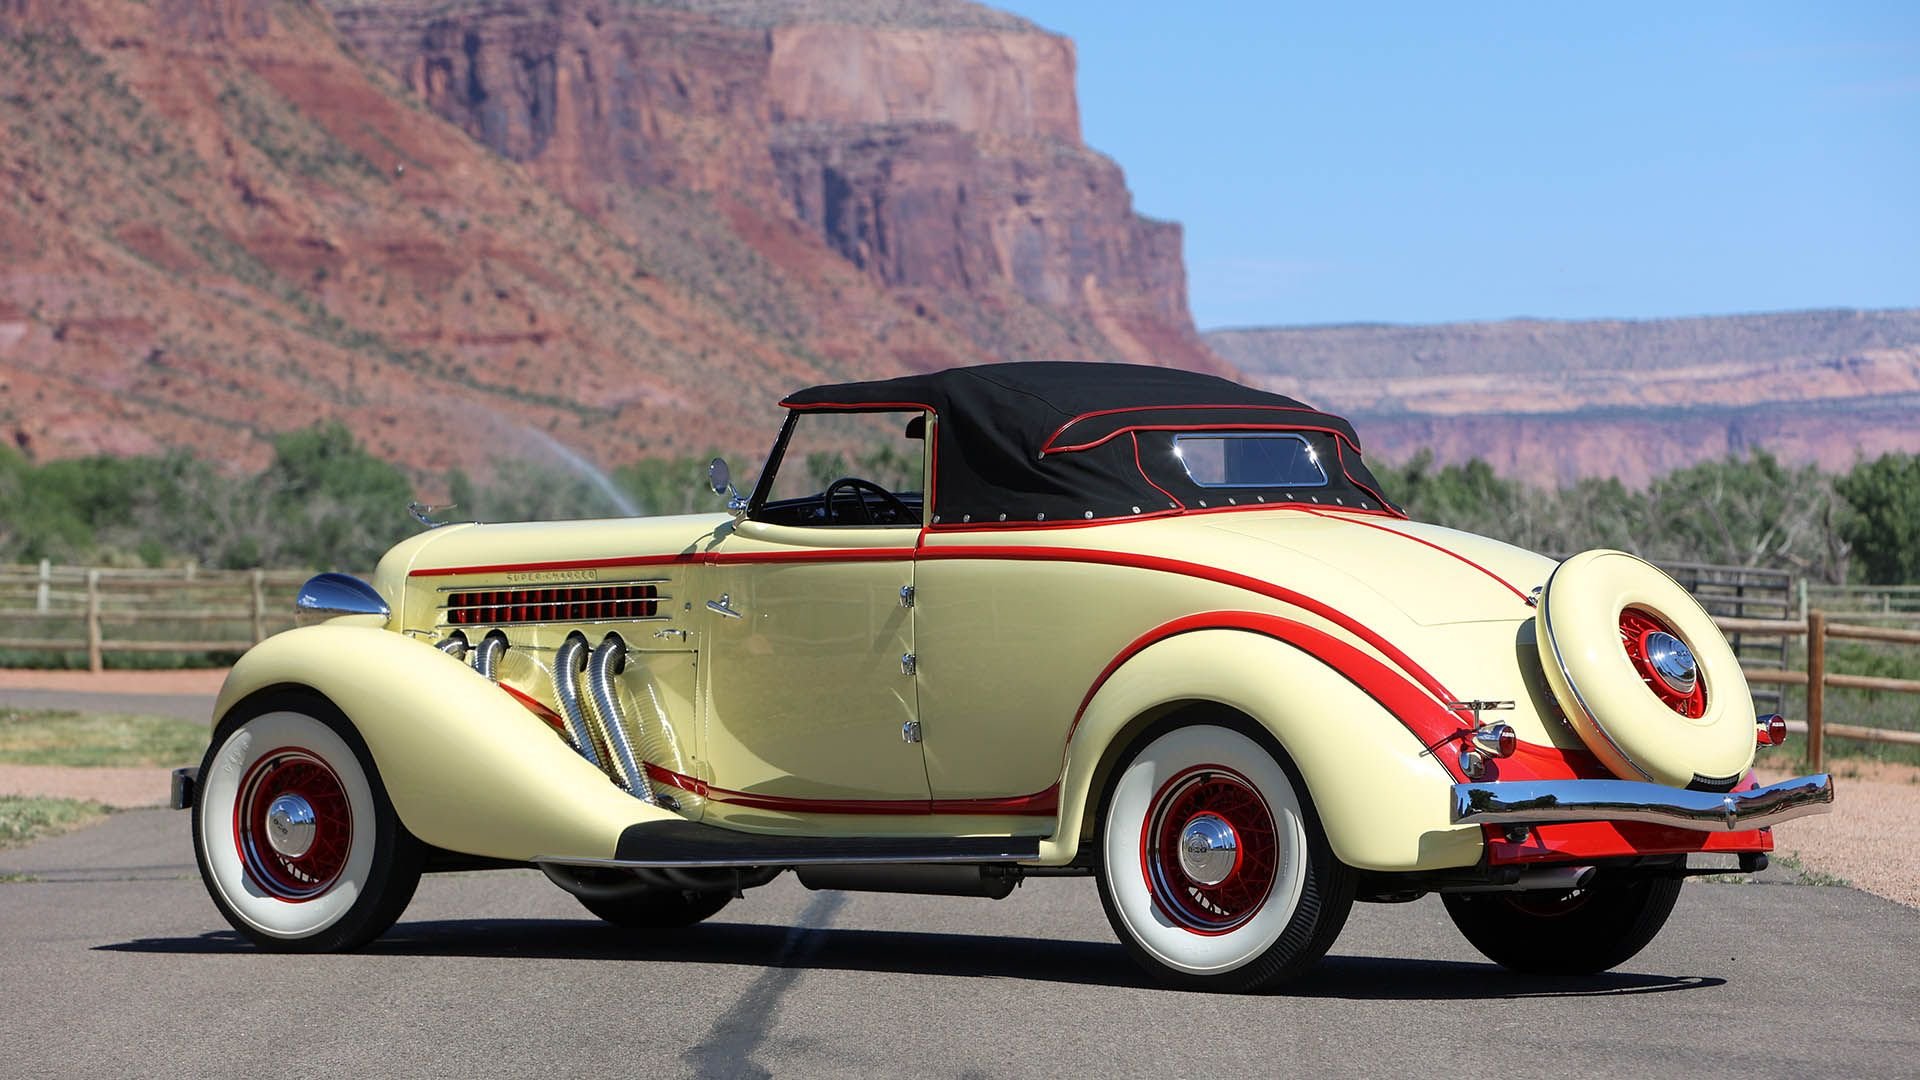 For Sale 1936 Auburn 852 Supercharged Cabriolet